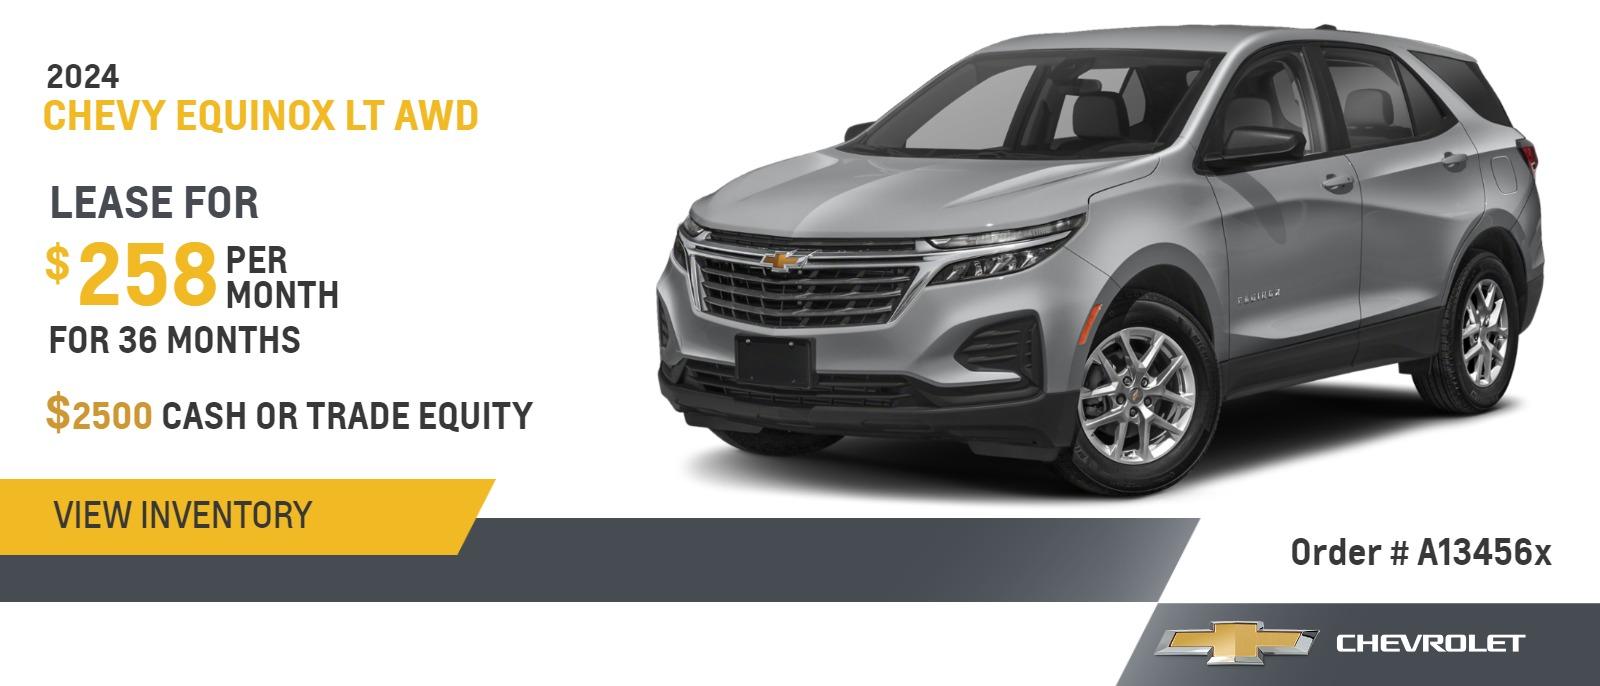 2024 Chevy Equinox LT AWD
$2500 Cash or Trade Equity
$258/ 36 Months 
Order # A13456x